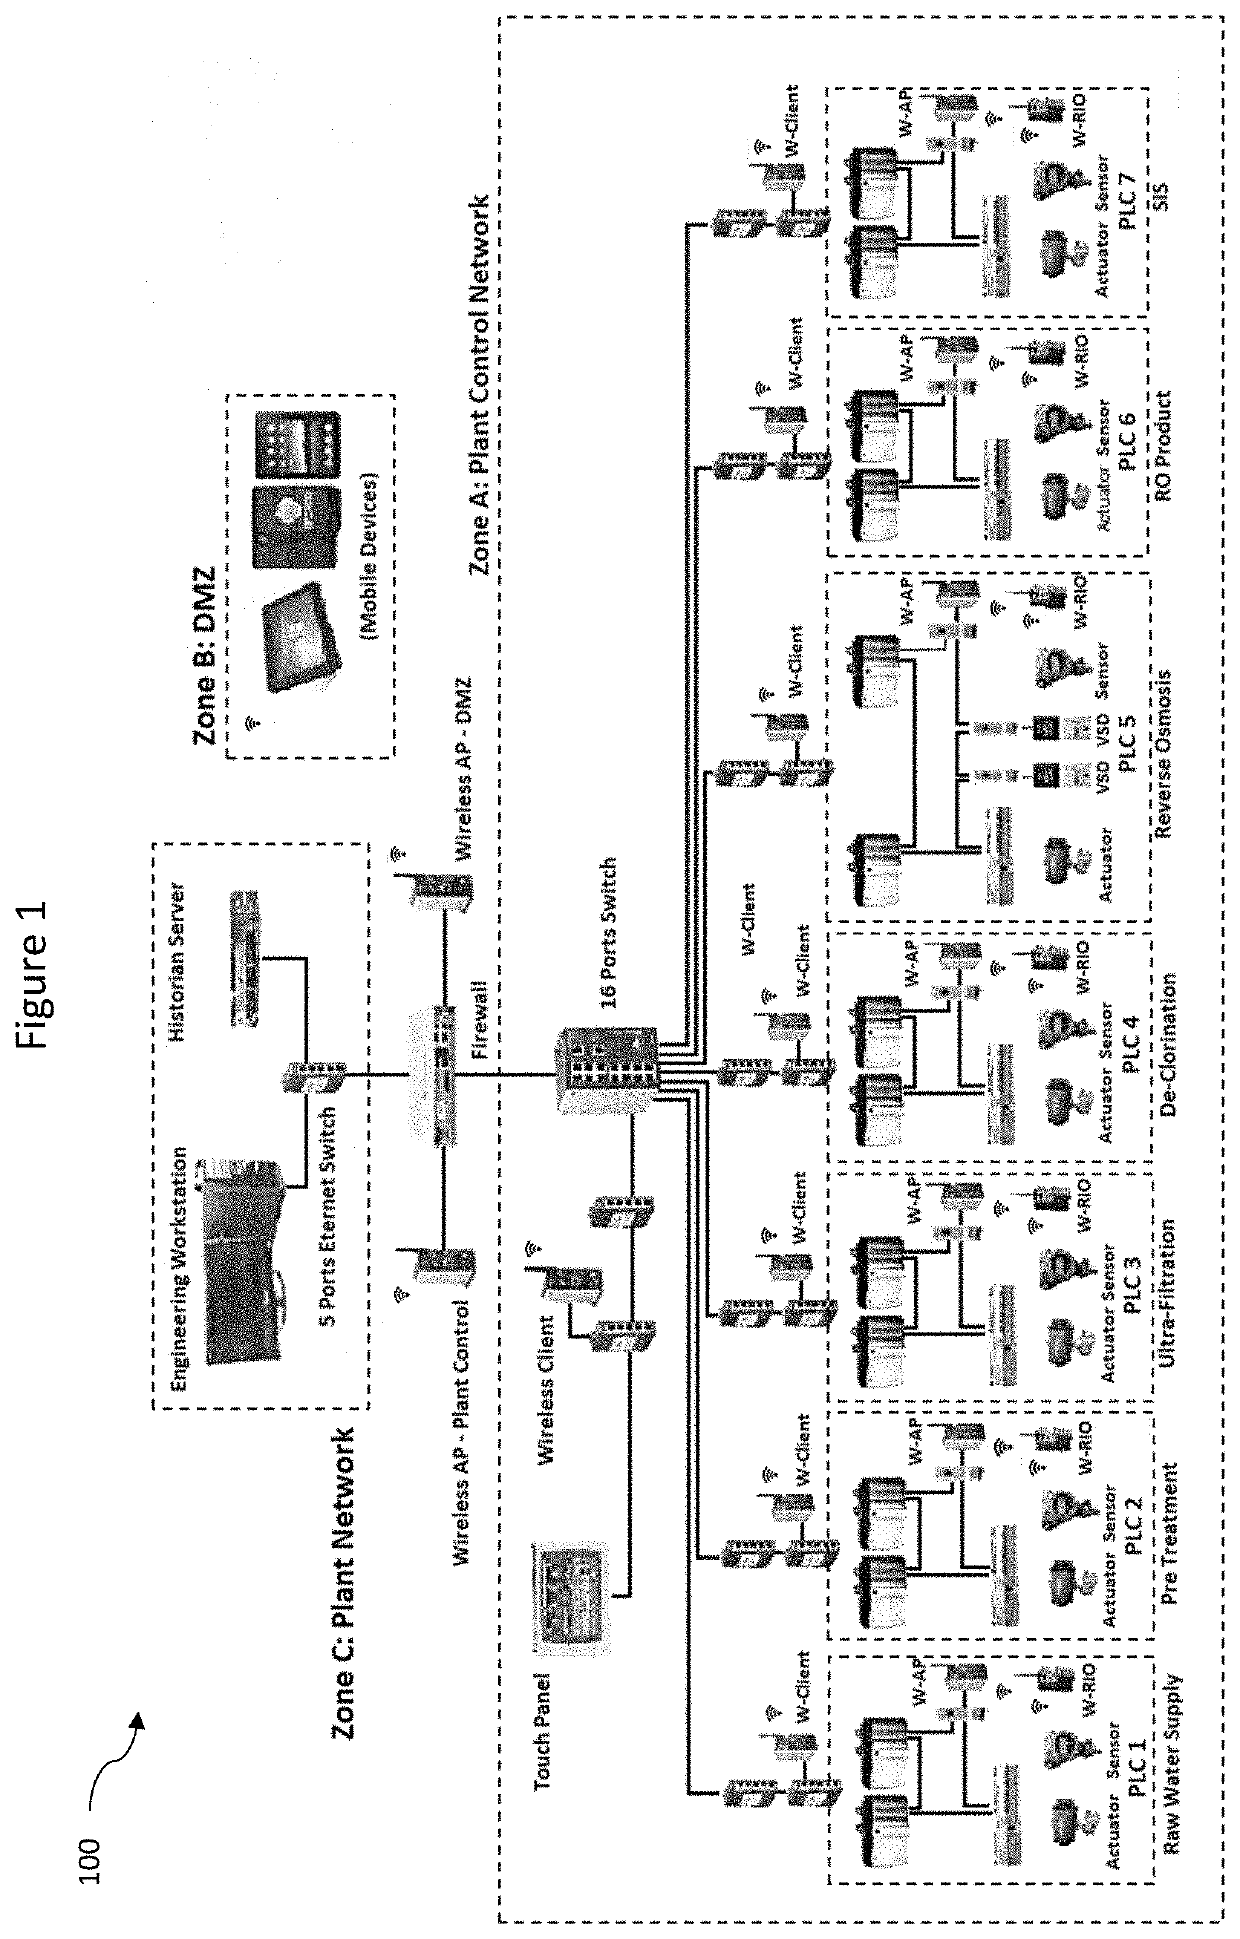 A method of generating invariants for distributed attack detection, and apparatus thereof